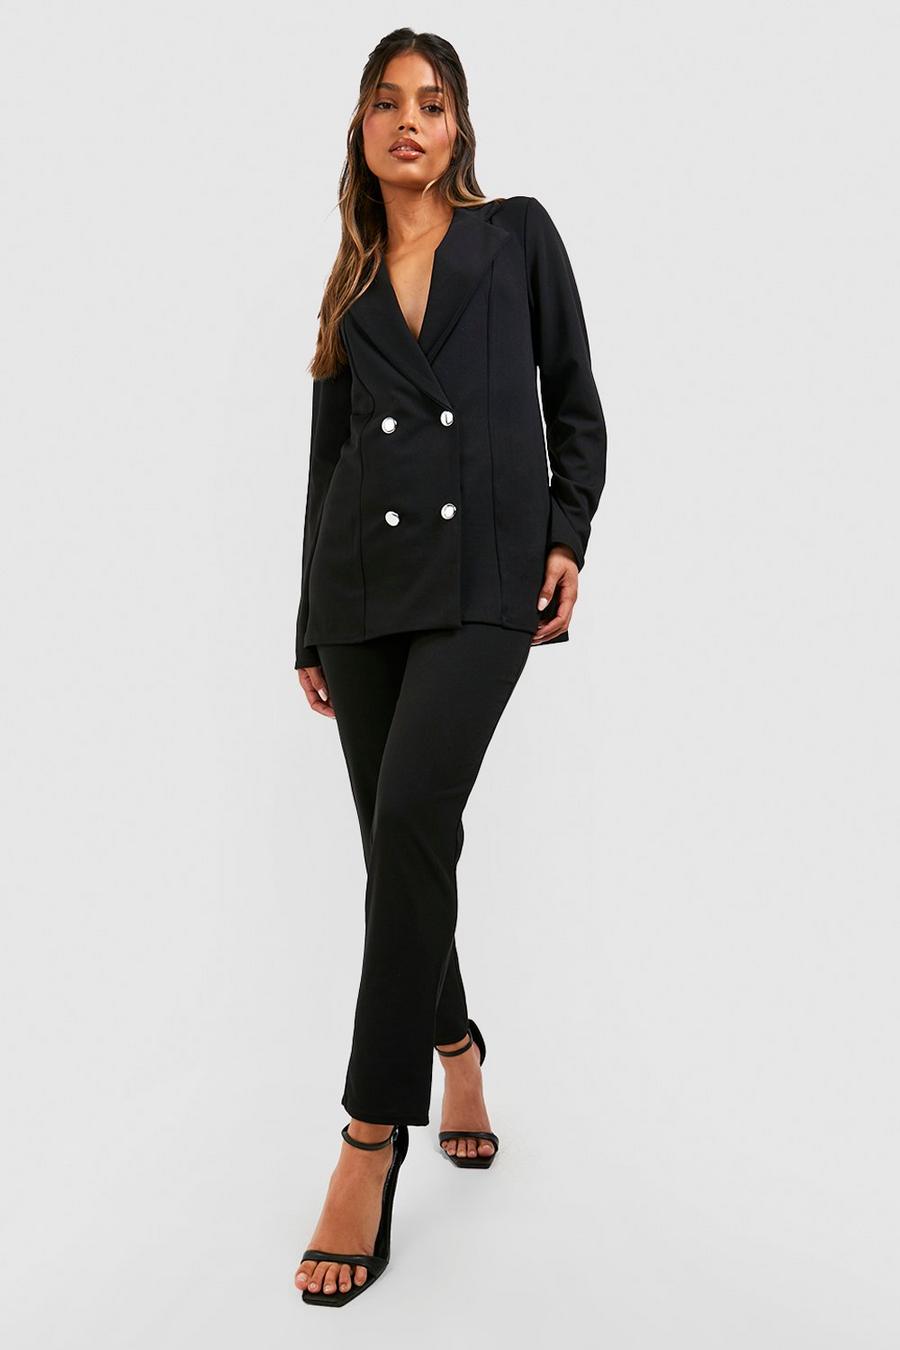 Black Jersey Double Breasted Blazer And Pants Suit Set